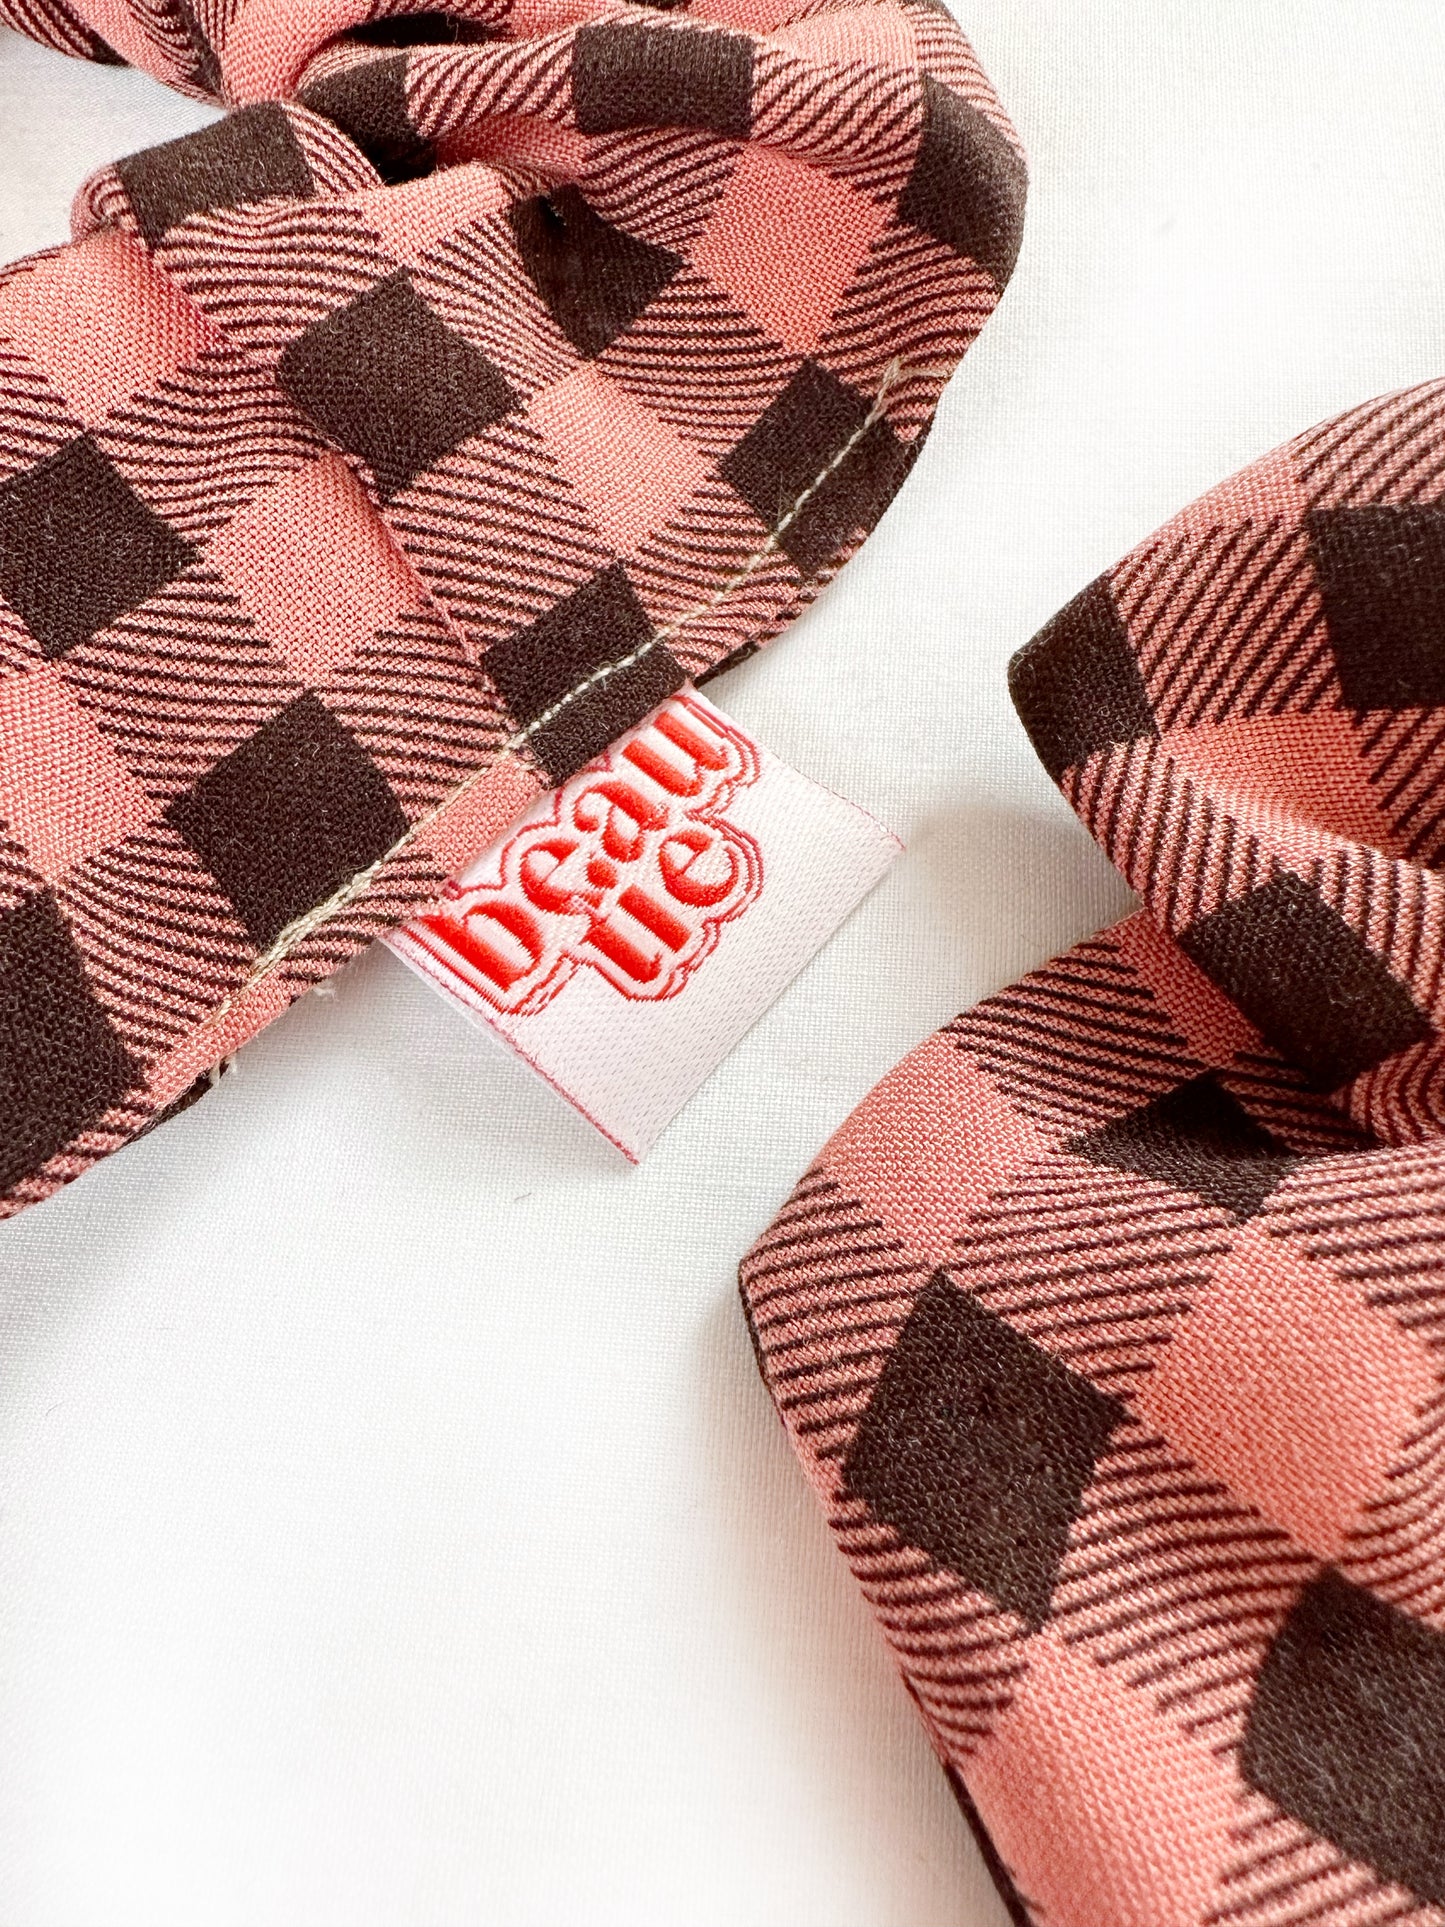 Scrunchie and hair bow gift set in gingham